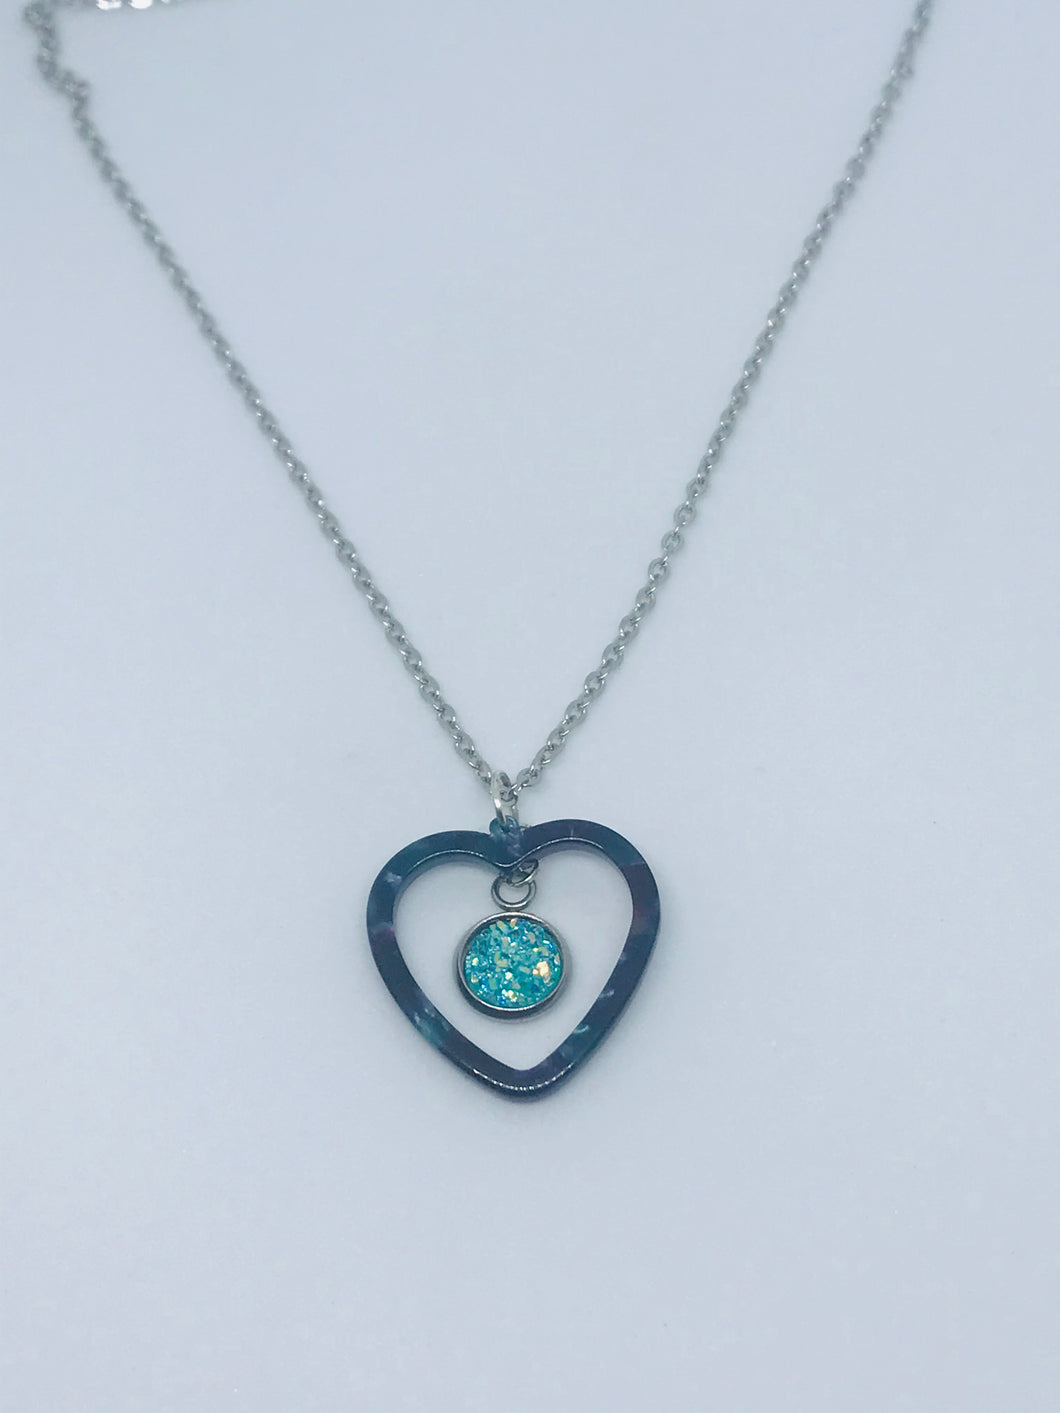 Lake Blue Druzy Heart Necklace #1 (Stainless Steel)